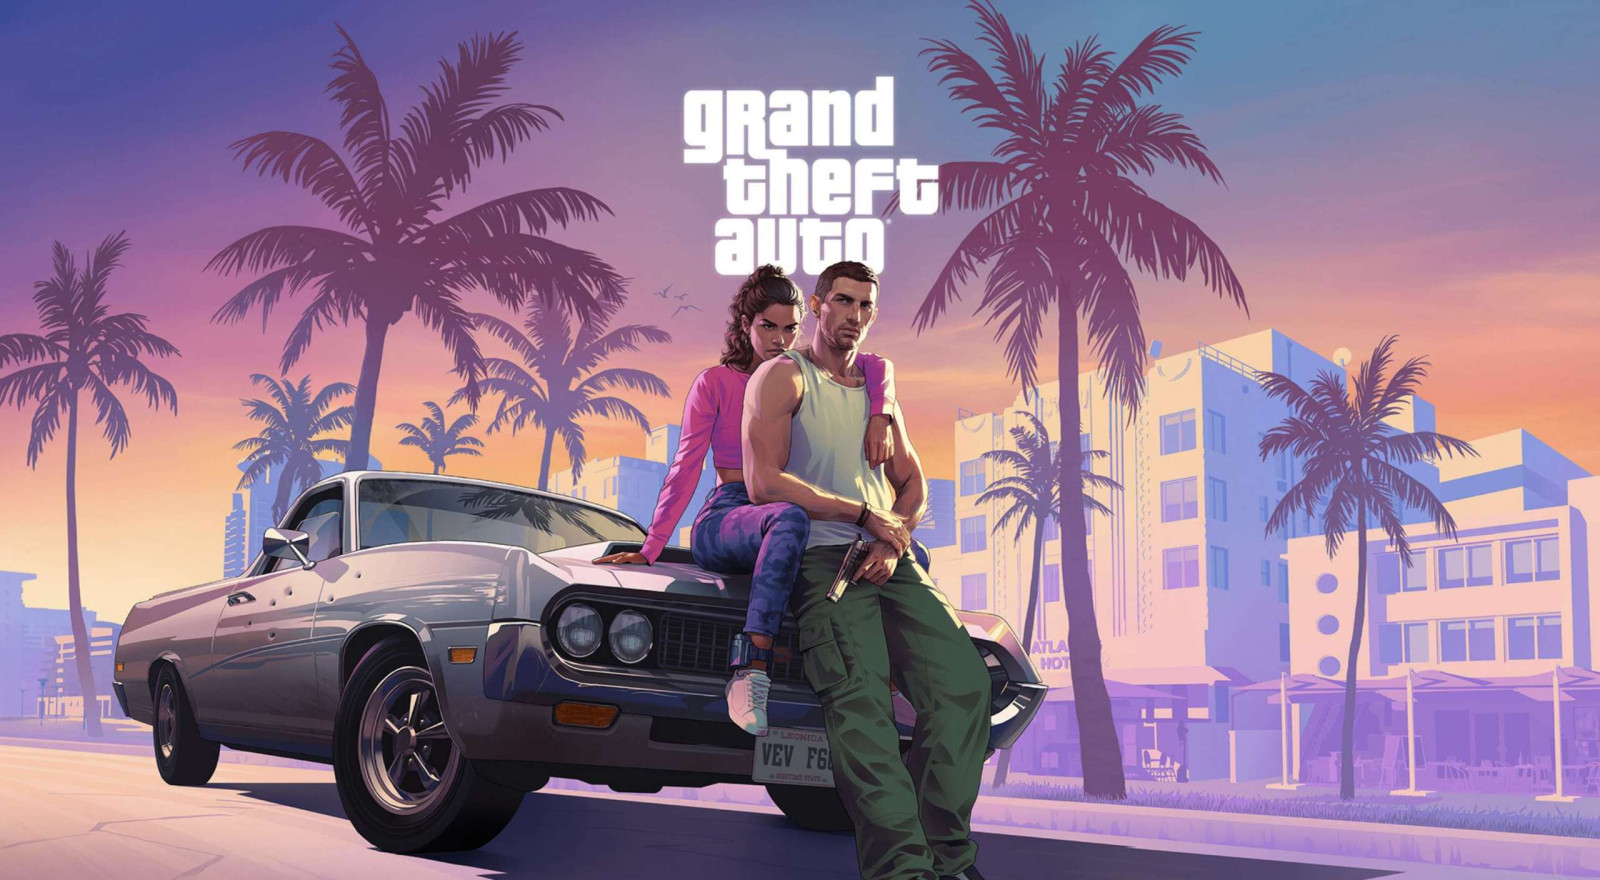 Cover image for GTA VI will reverse console's slump and solidify gaming's role at the heart of entertainment